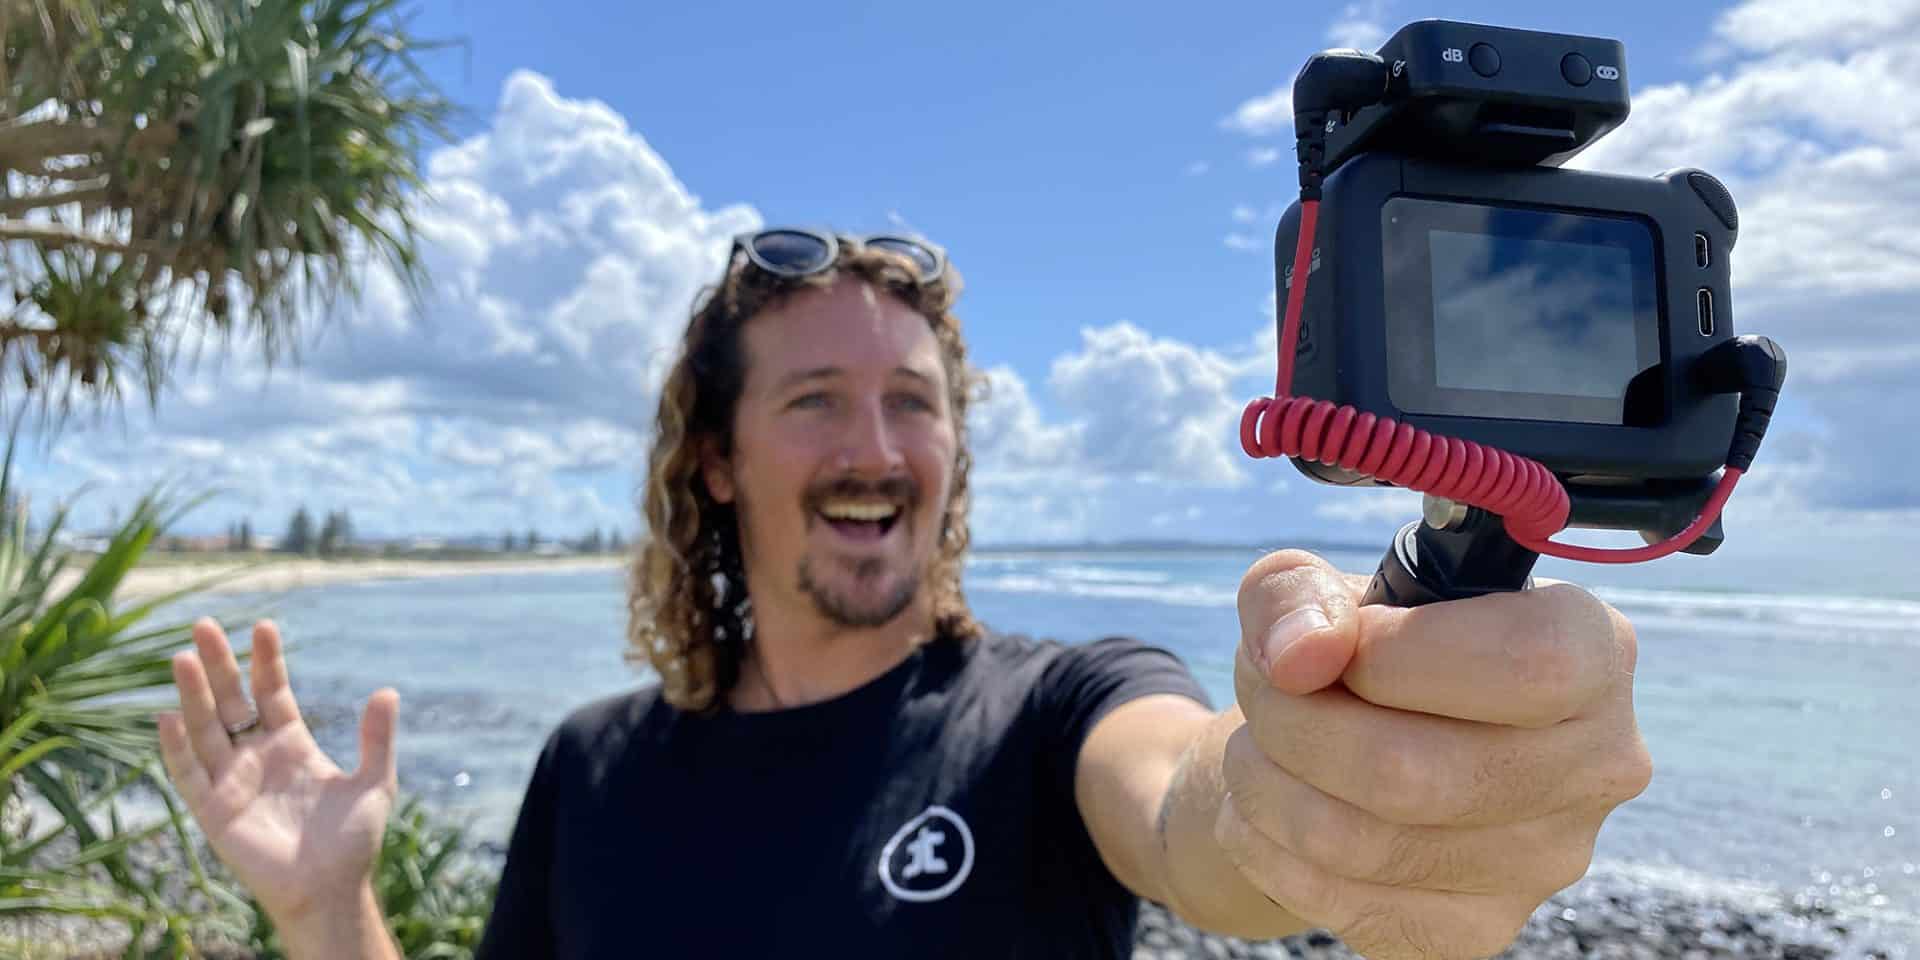 How To Use A GoPro For Vlogging